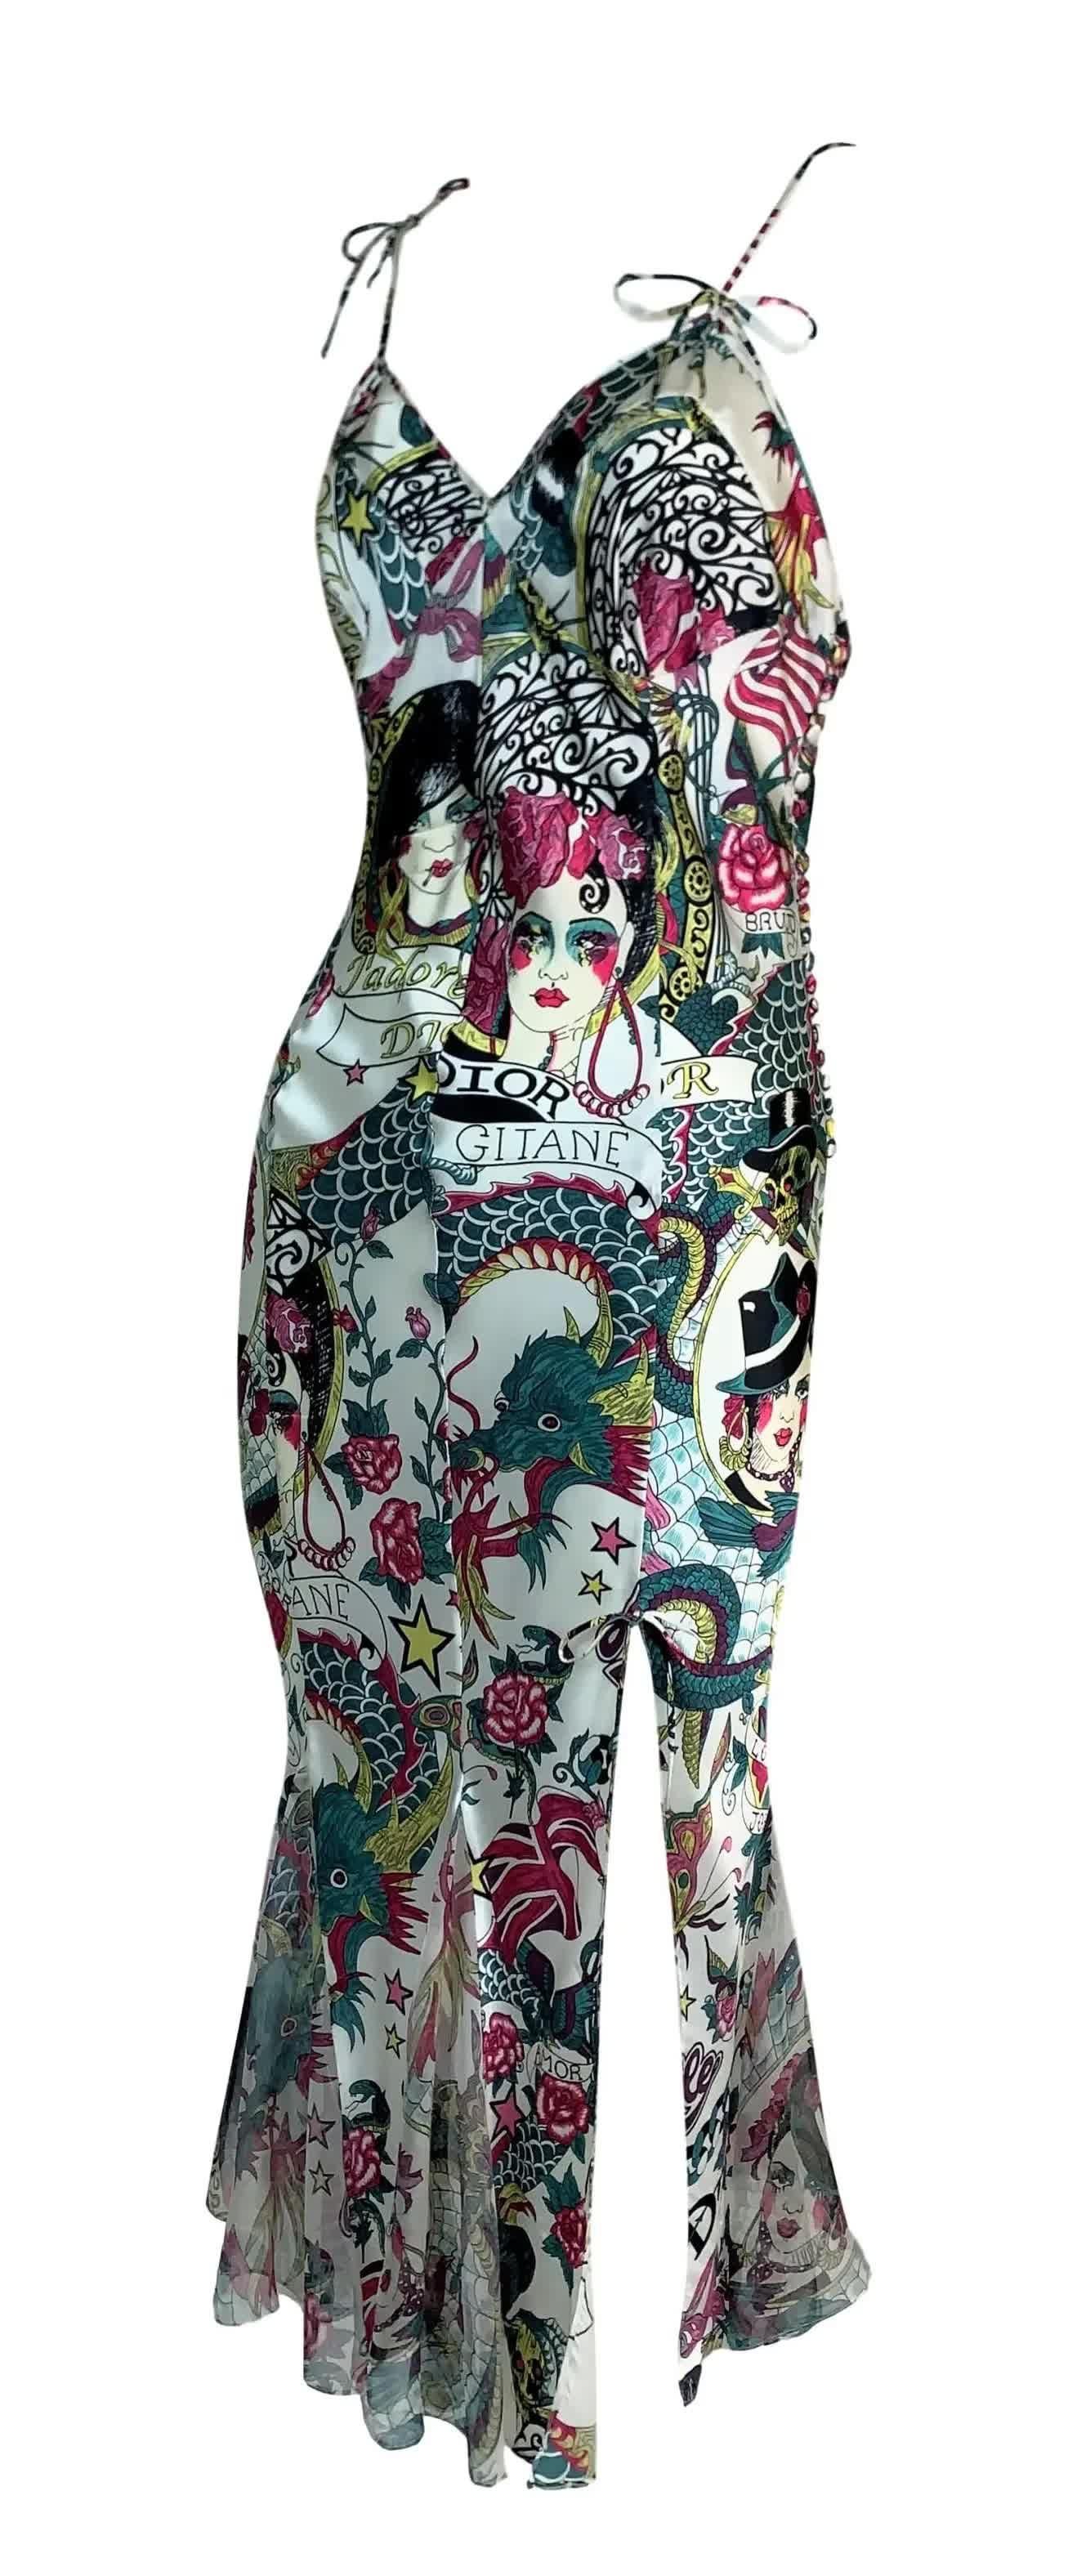 S/S 2004 Christian Dior John Galliano Silk Tattoo Dress

Thin straps. The bottom of the dress is finished with silk chiffon which flutters in the wind. 
Seductive side slit.

Size: FR - 34, US - 2


 